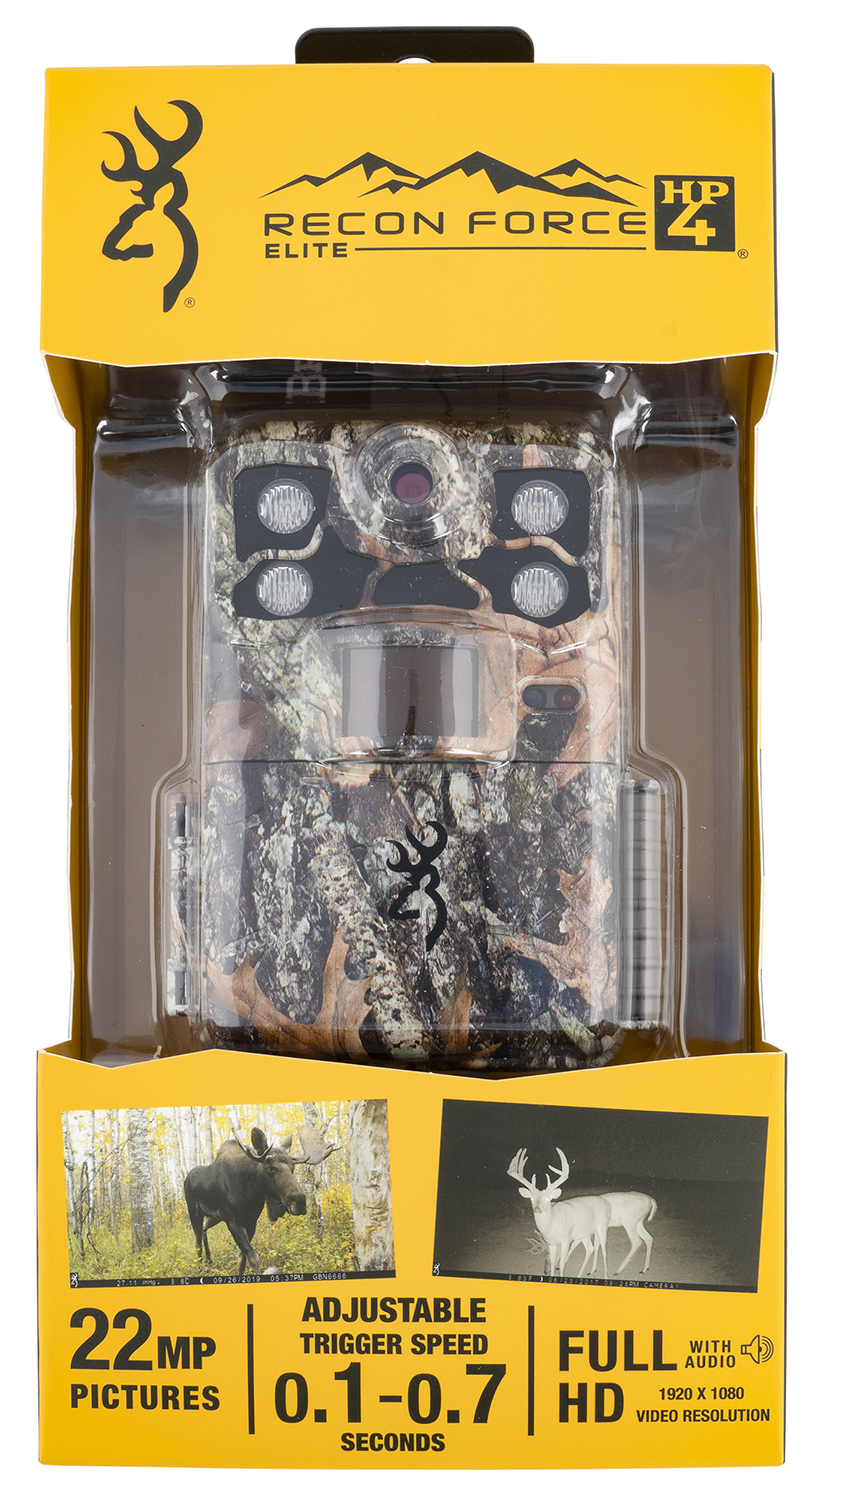 Browning Trail Cameras 7EHP4 Recon Force Elite HP4 2